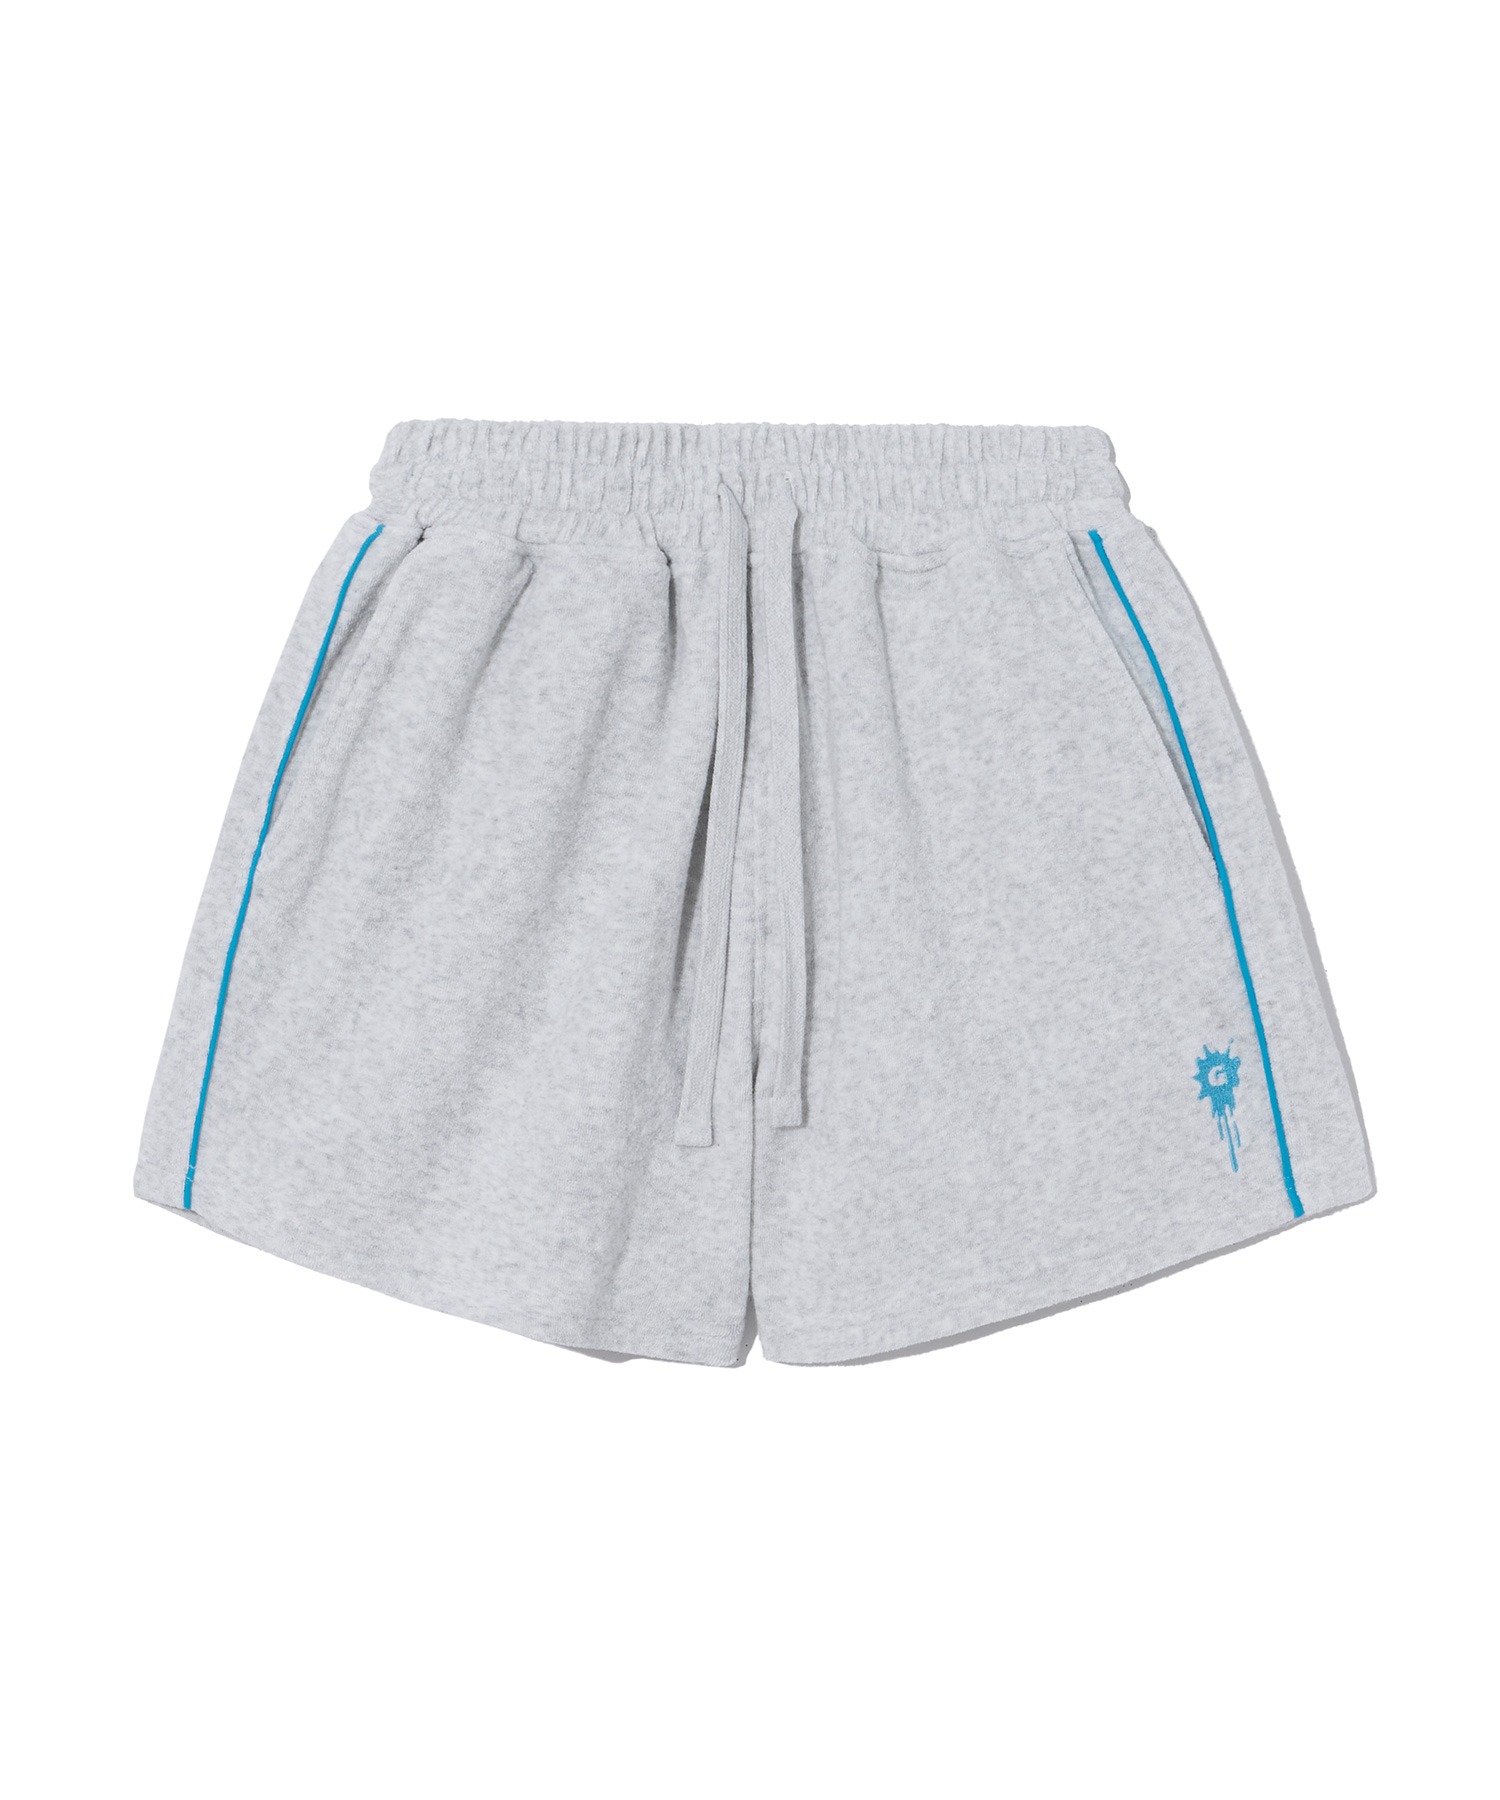 (W) COOL TERRY VACANCE SHORTS (OATMEAL GREY) [LRRMCPH310M]